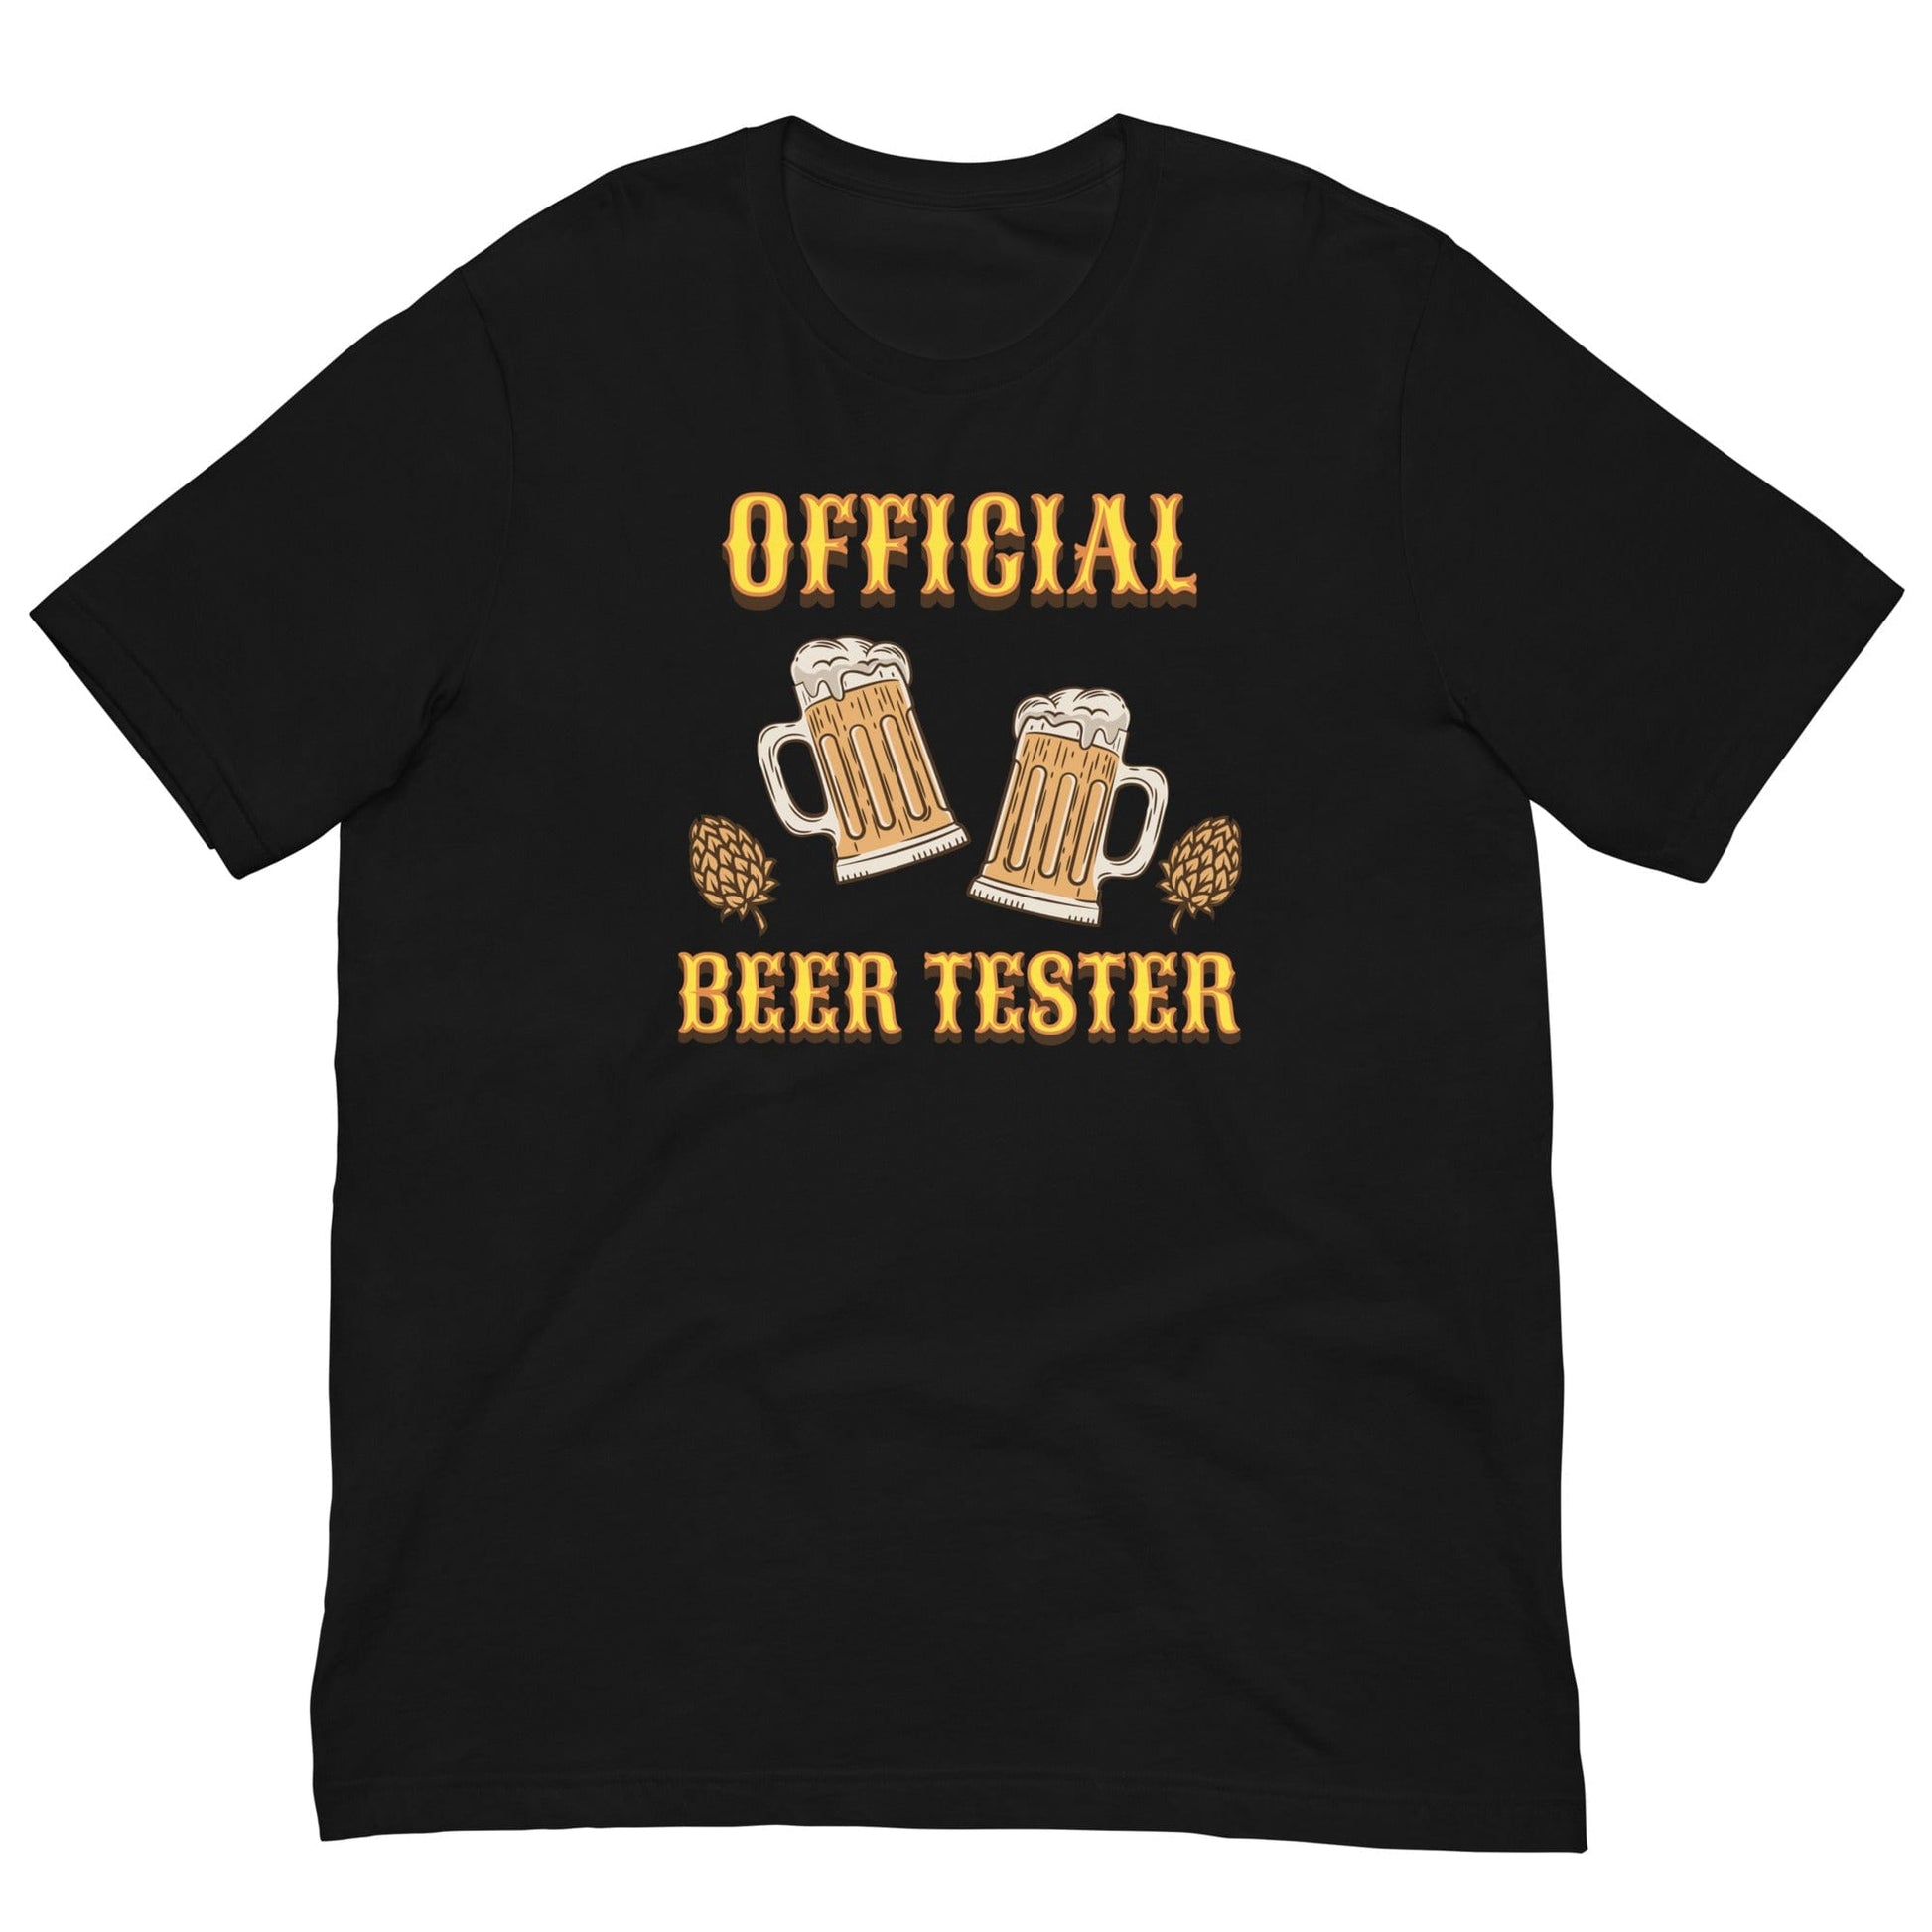 Official Beer tester T-shirt Black / XS